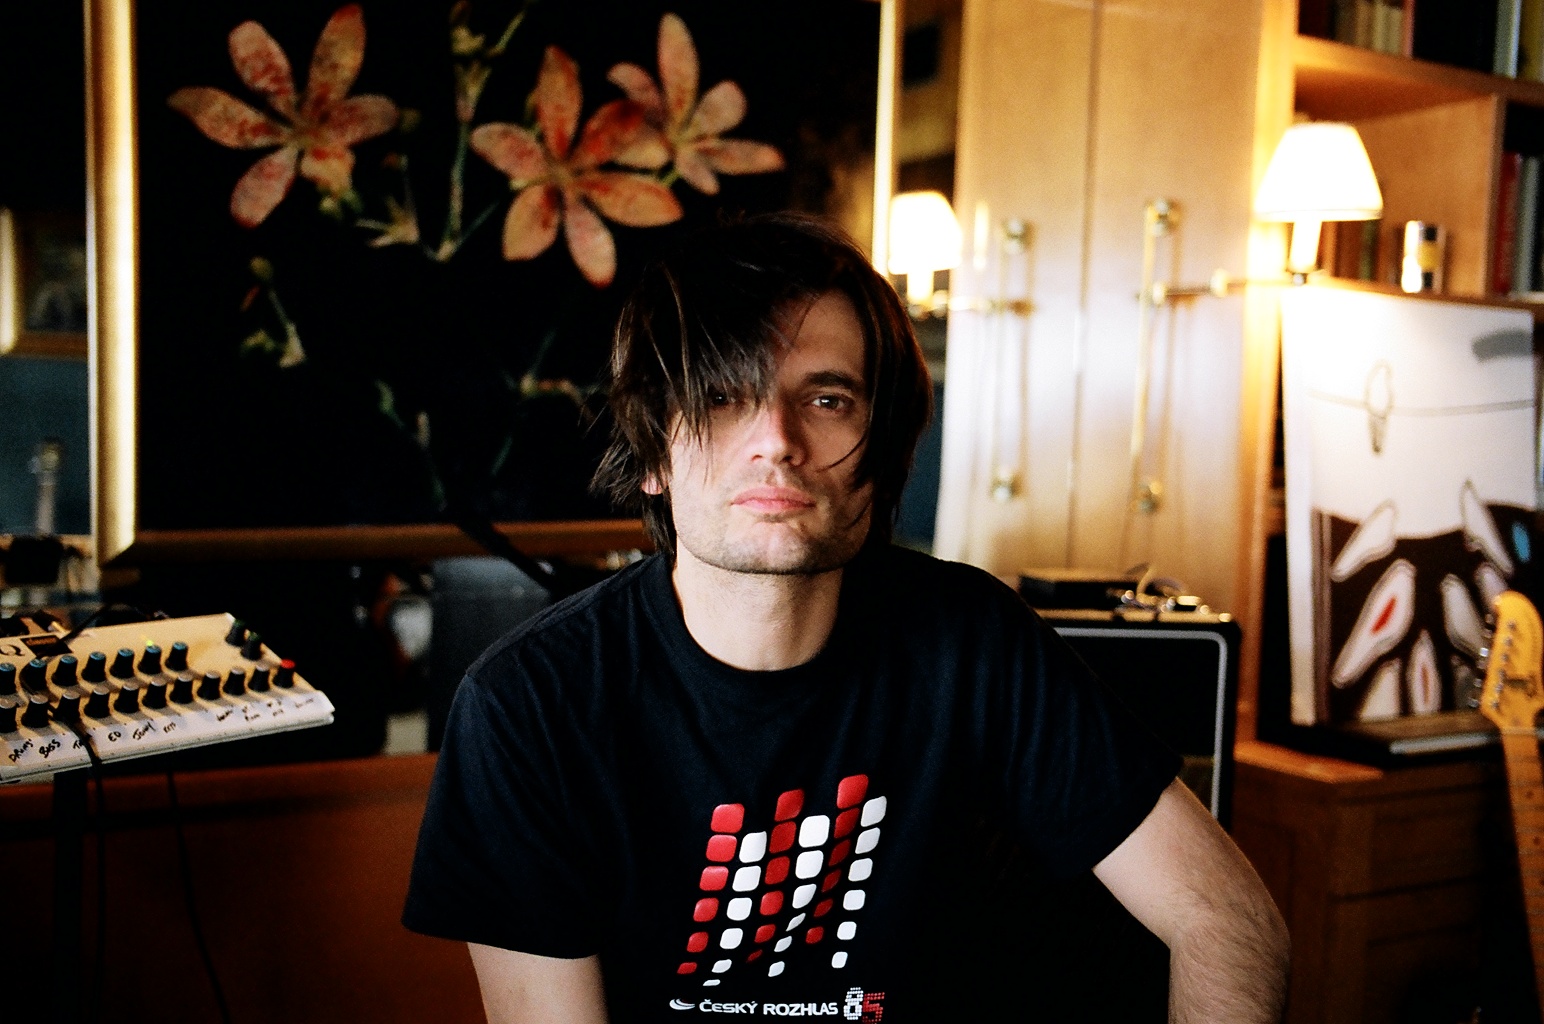 Jonny Greenwood Backgrounds, Compatible - PC, Mobile, Gadgets| 1544x1024 px